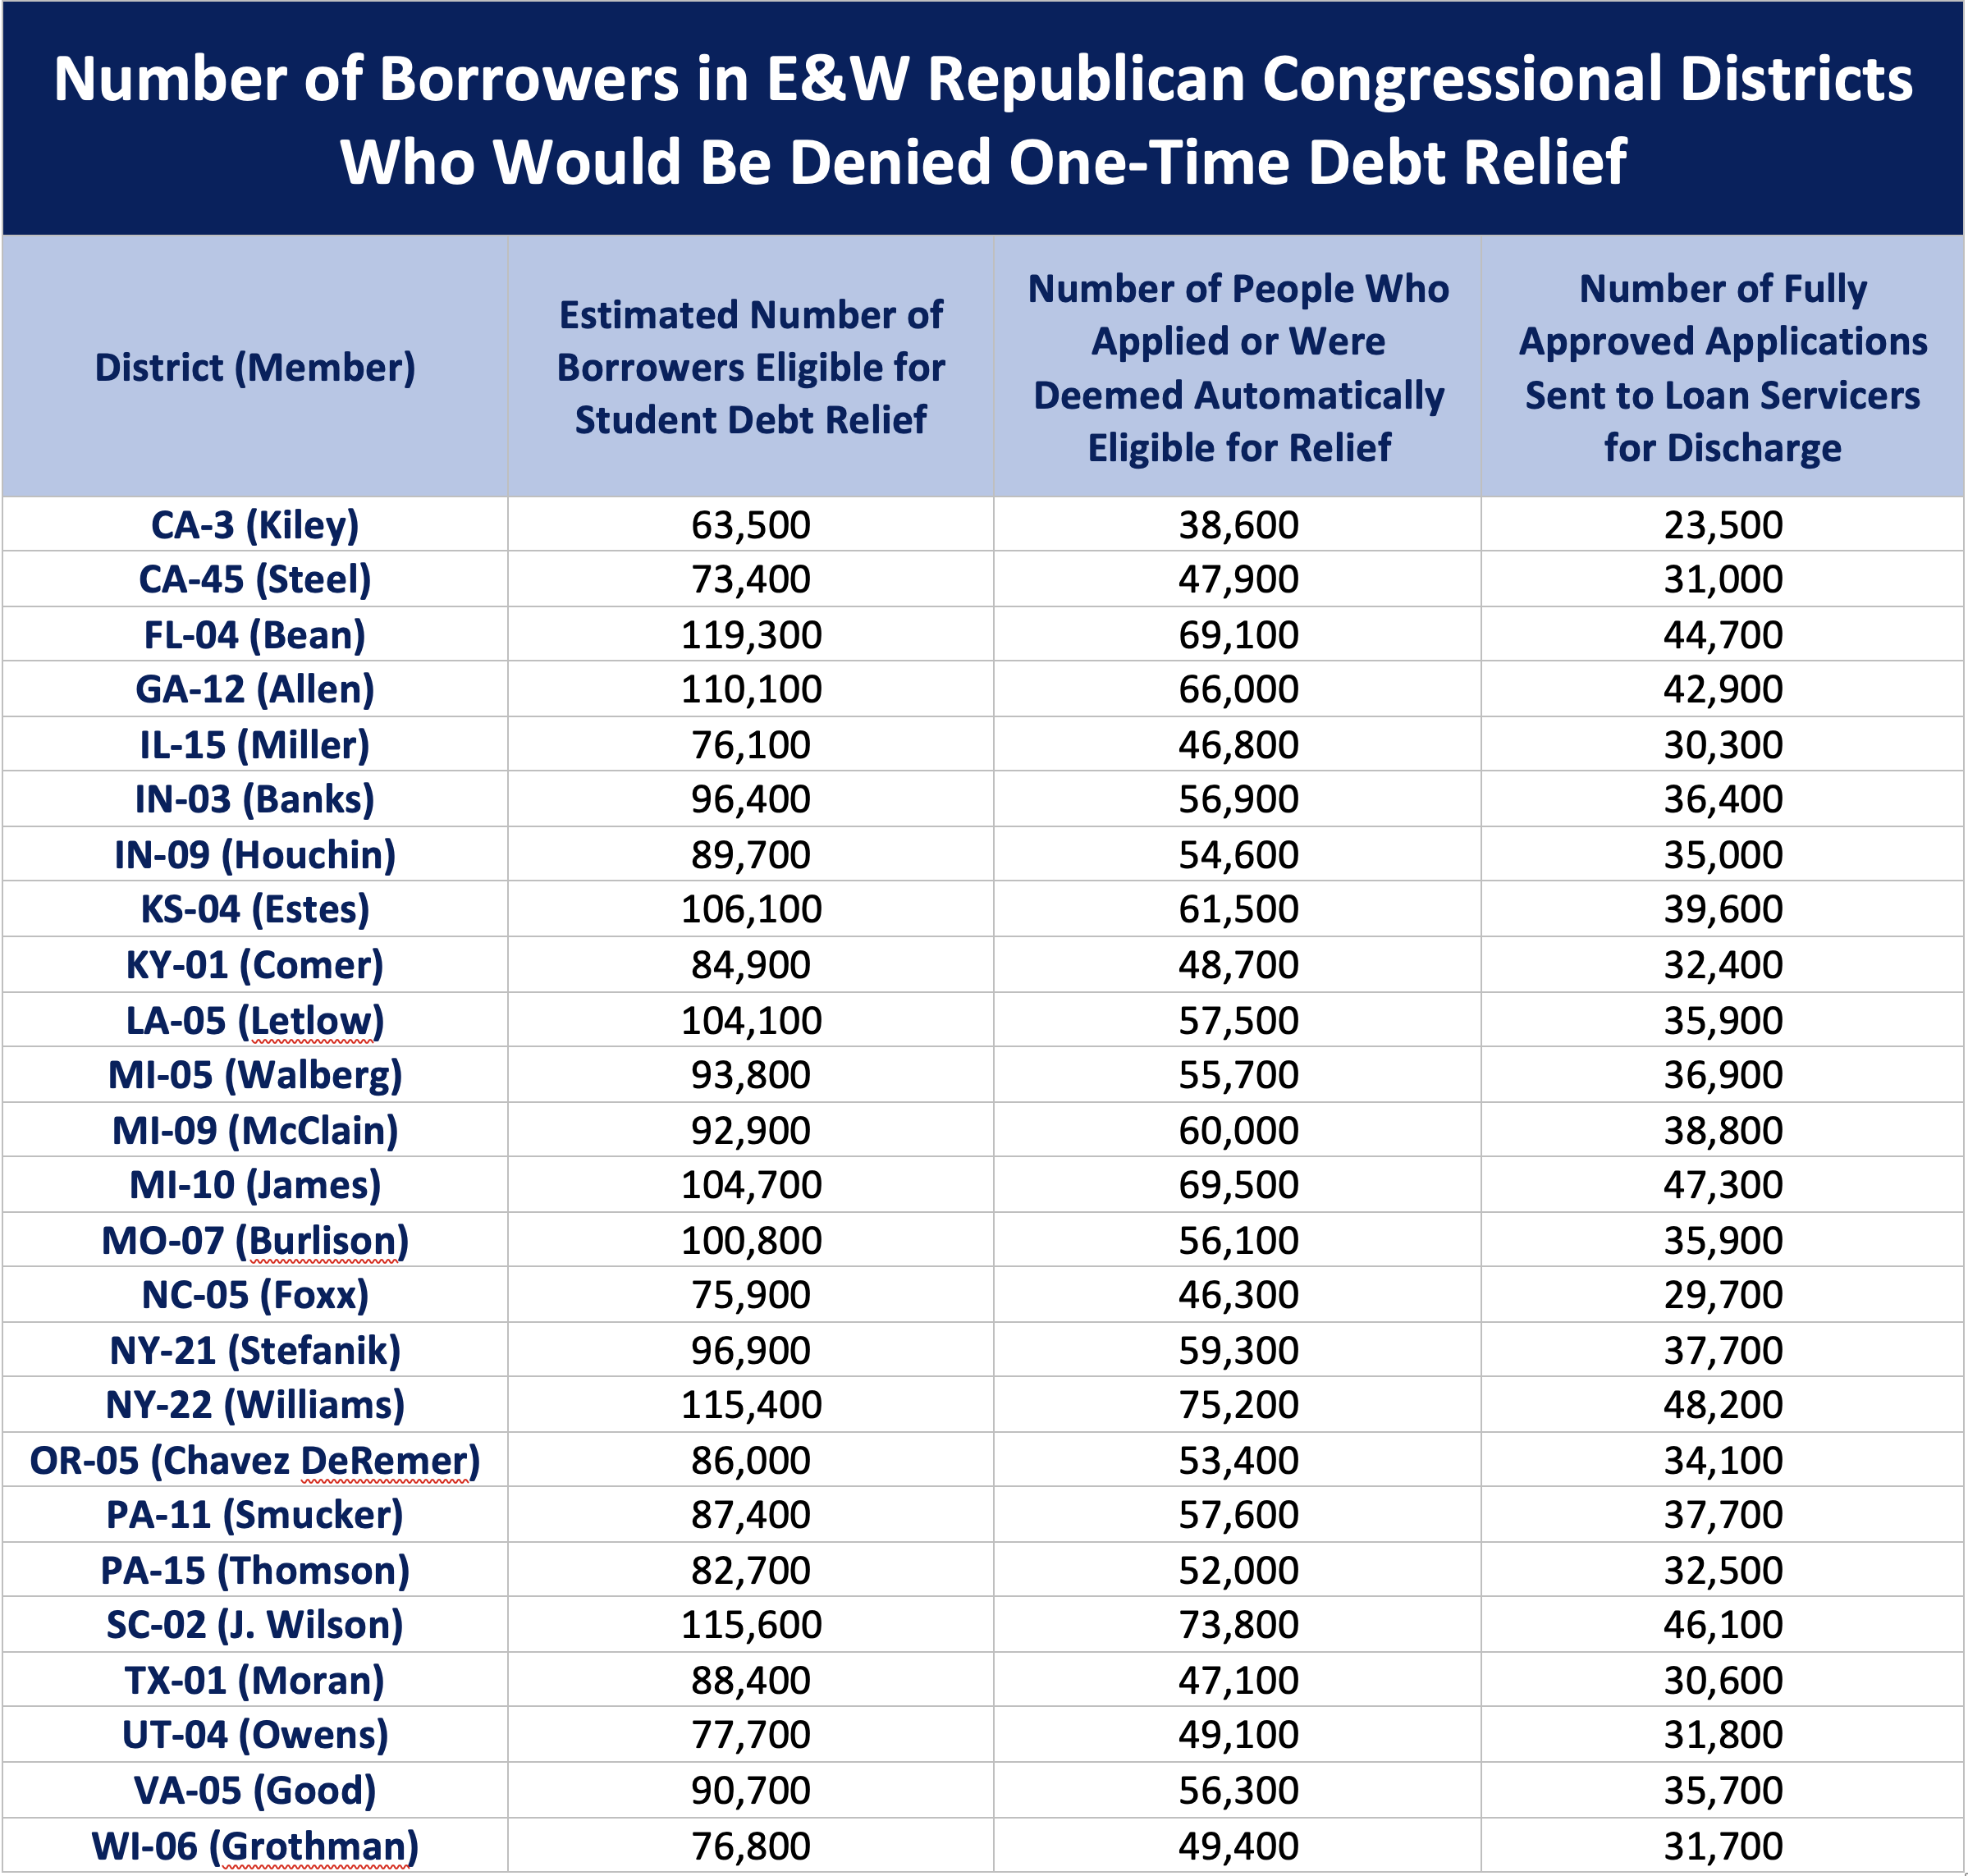 Number of Borrowers in E&W Republican Congressional Districts Who Would Be Denied One-Time Debt Relief